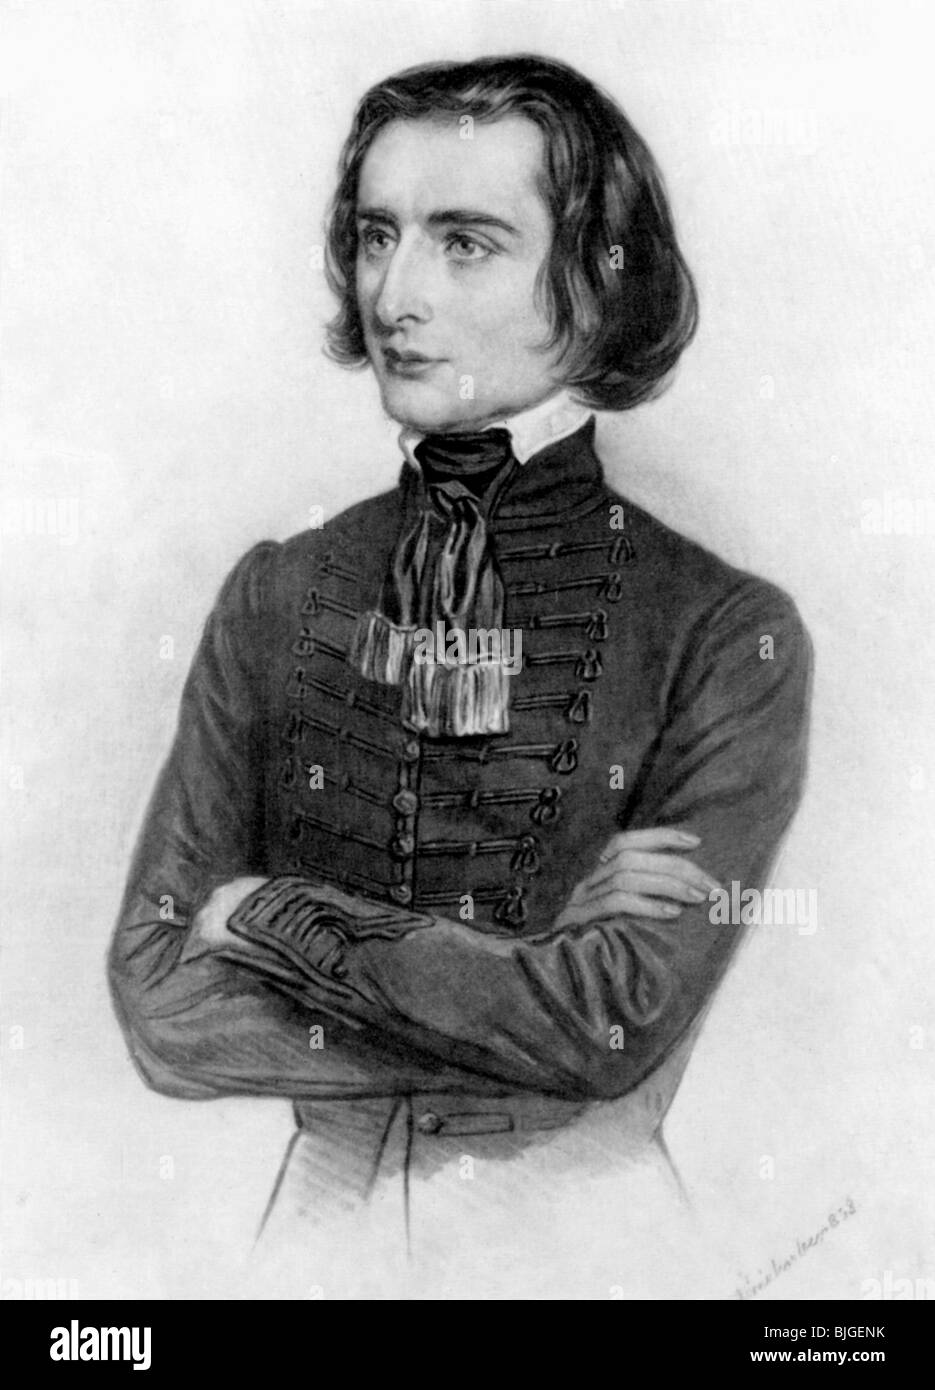 Liszt, Franz, 22.10.1811 - 31.7.1886, Hungarian composer and pianist, half length, lithograph by Josef Kriehuber the Elder, 1838, Stock Photo